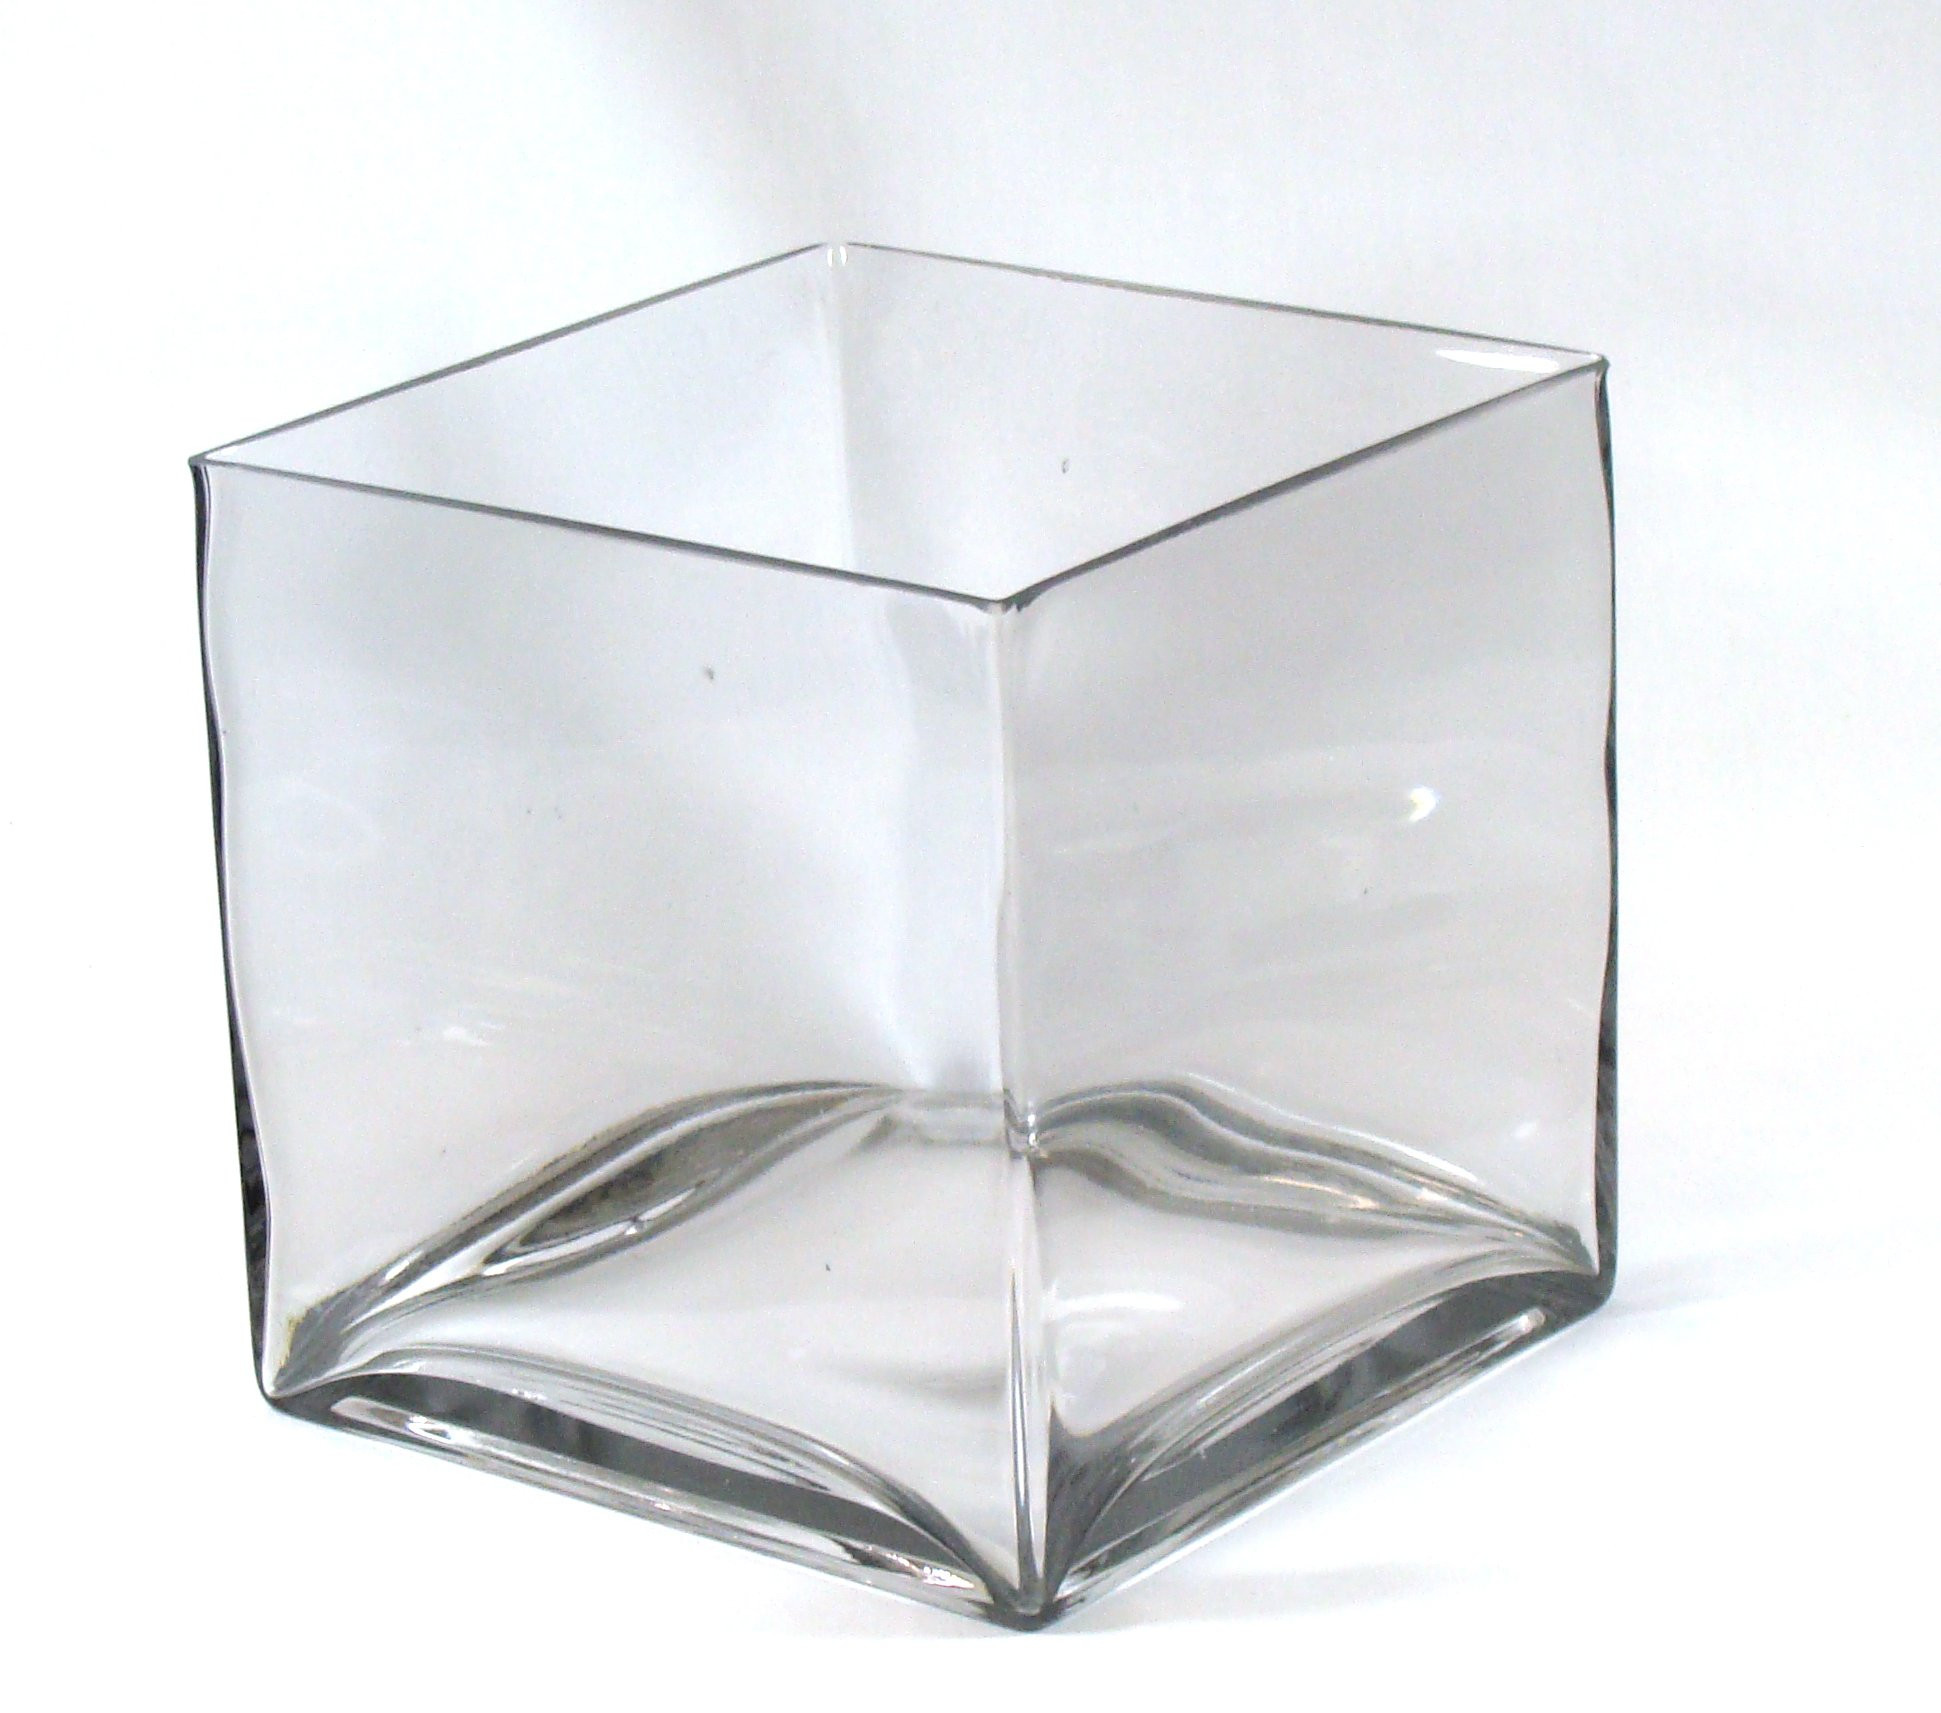 13 attractive 24 Inch Glass Vase 2024 free download 24 inch glass vase of buy 8 inch round large glass vase 8 clear cylinder oversize with 8 square large glass vase 8 inch clear cube oversize centerpiece 8x8x8 candleholder